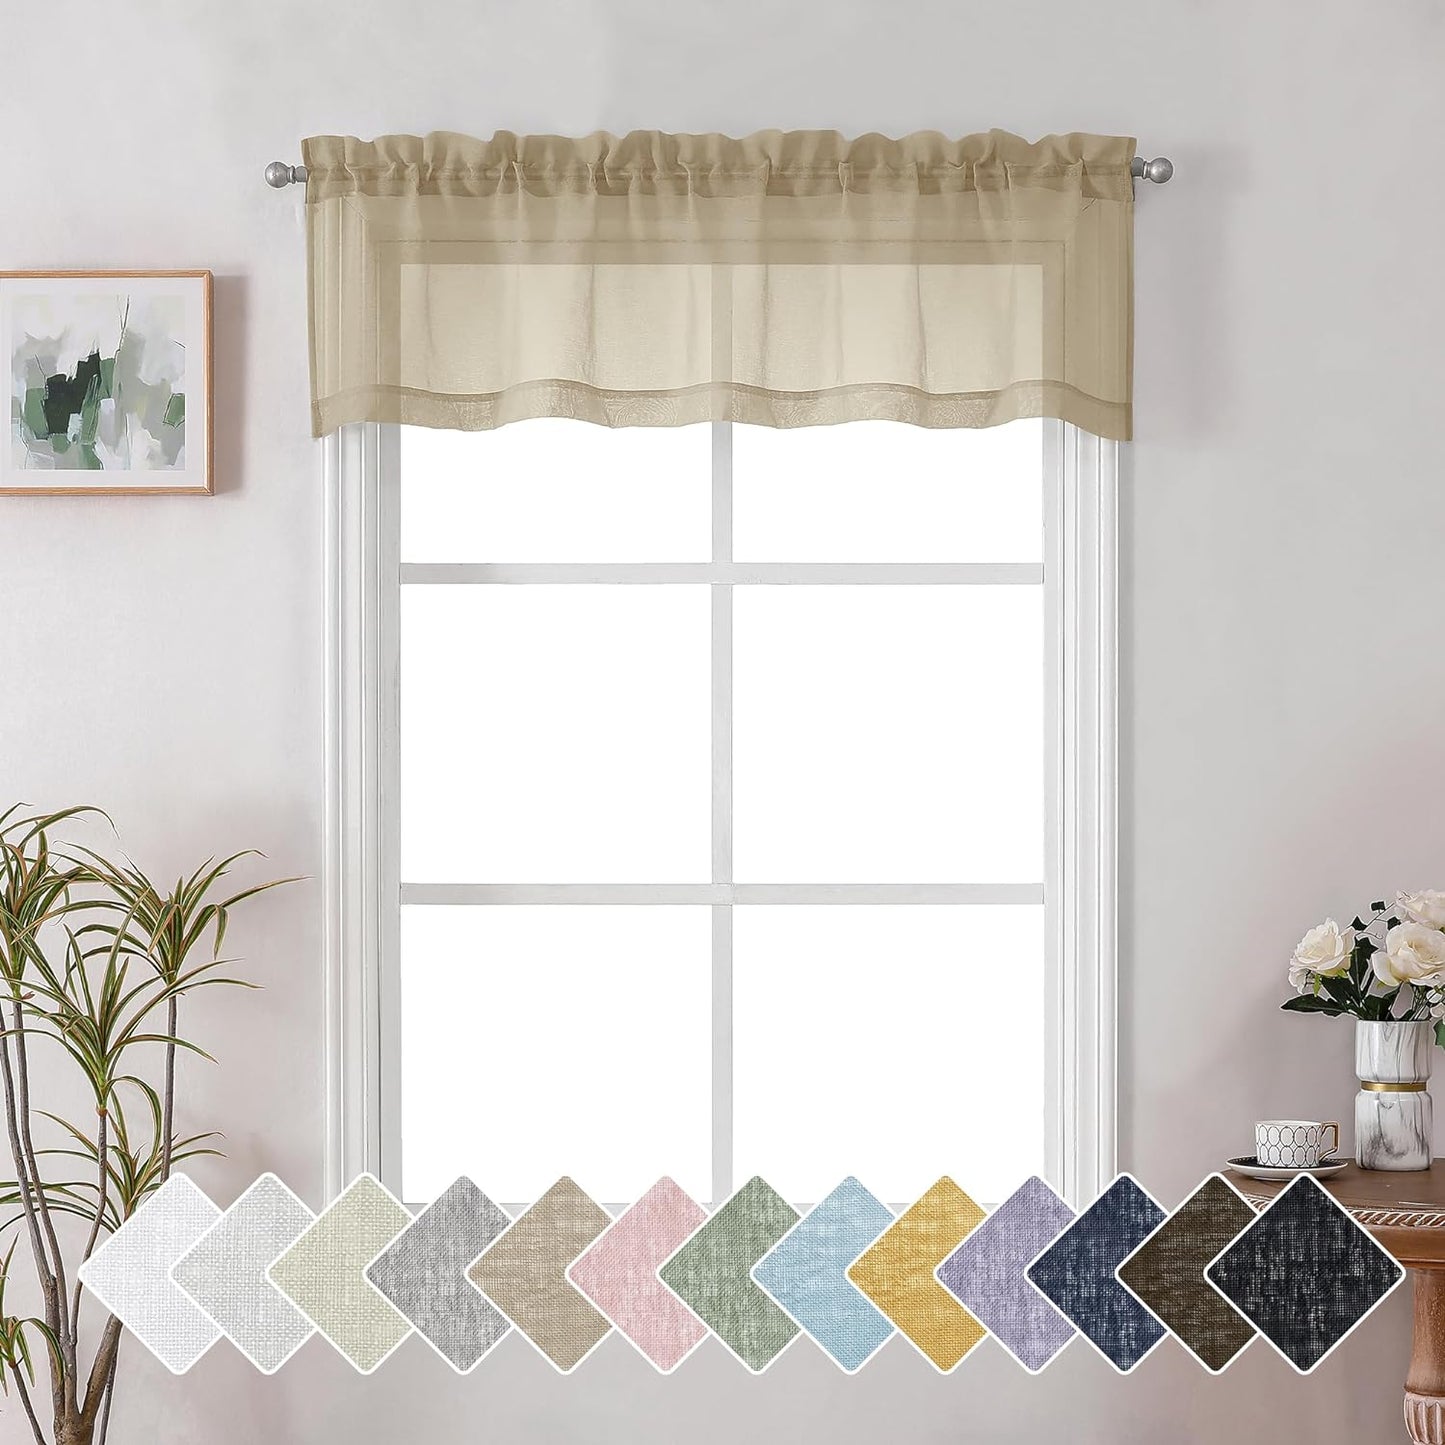 Lecloud Doris Faux Linen Sheer Grey Valance Curtains 14 Inches Length, Cafe Kitchen Bedroom Living Room Gauzy Silver Grey Curtain for Small Window, Slub Light Gray Valance Dual Rod Pockets 60X14 Inch  Lecloud Taupe 60 W X 14 L 